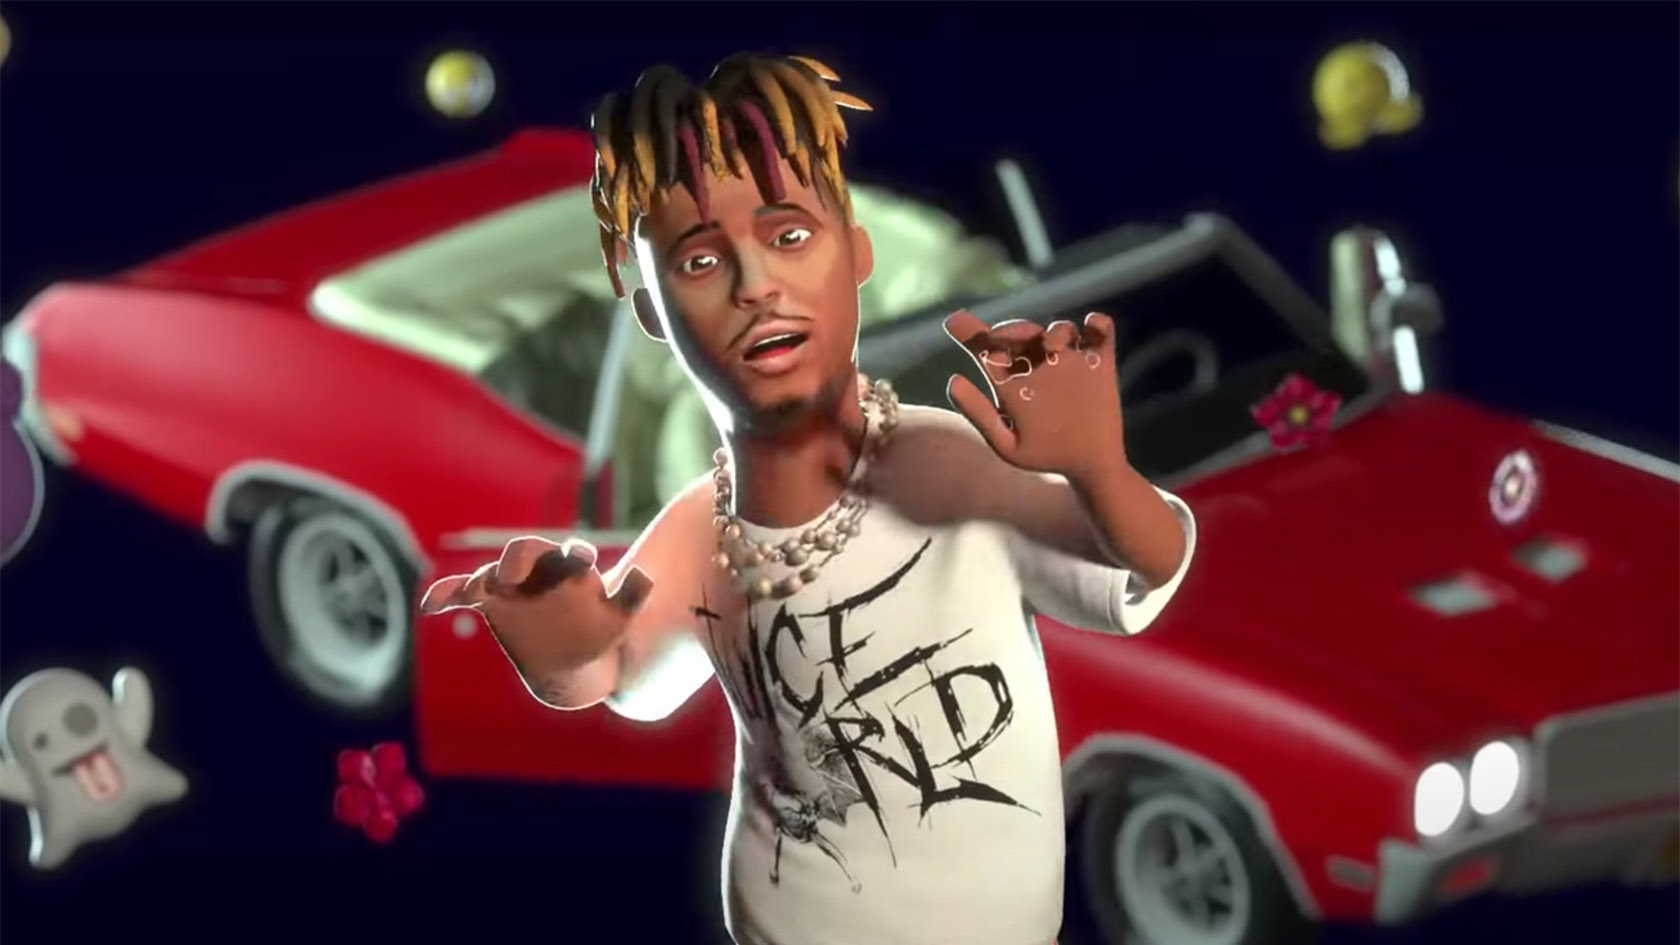 Watch: Animated Visual For Juice WRLD's 'Wishing Well' Shows His